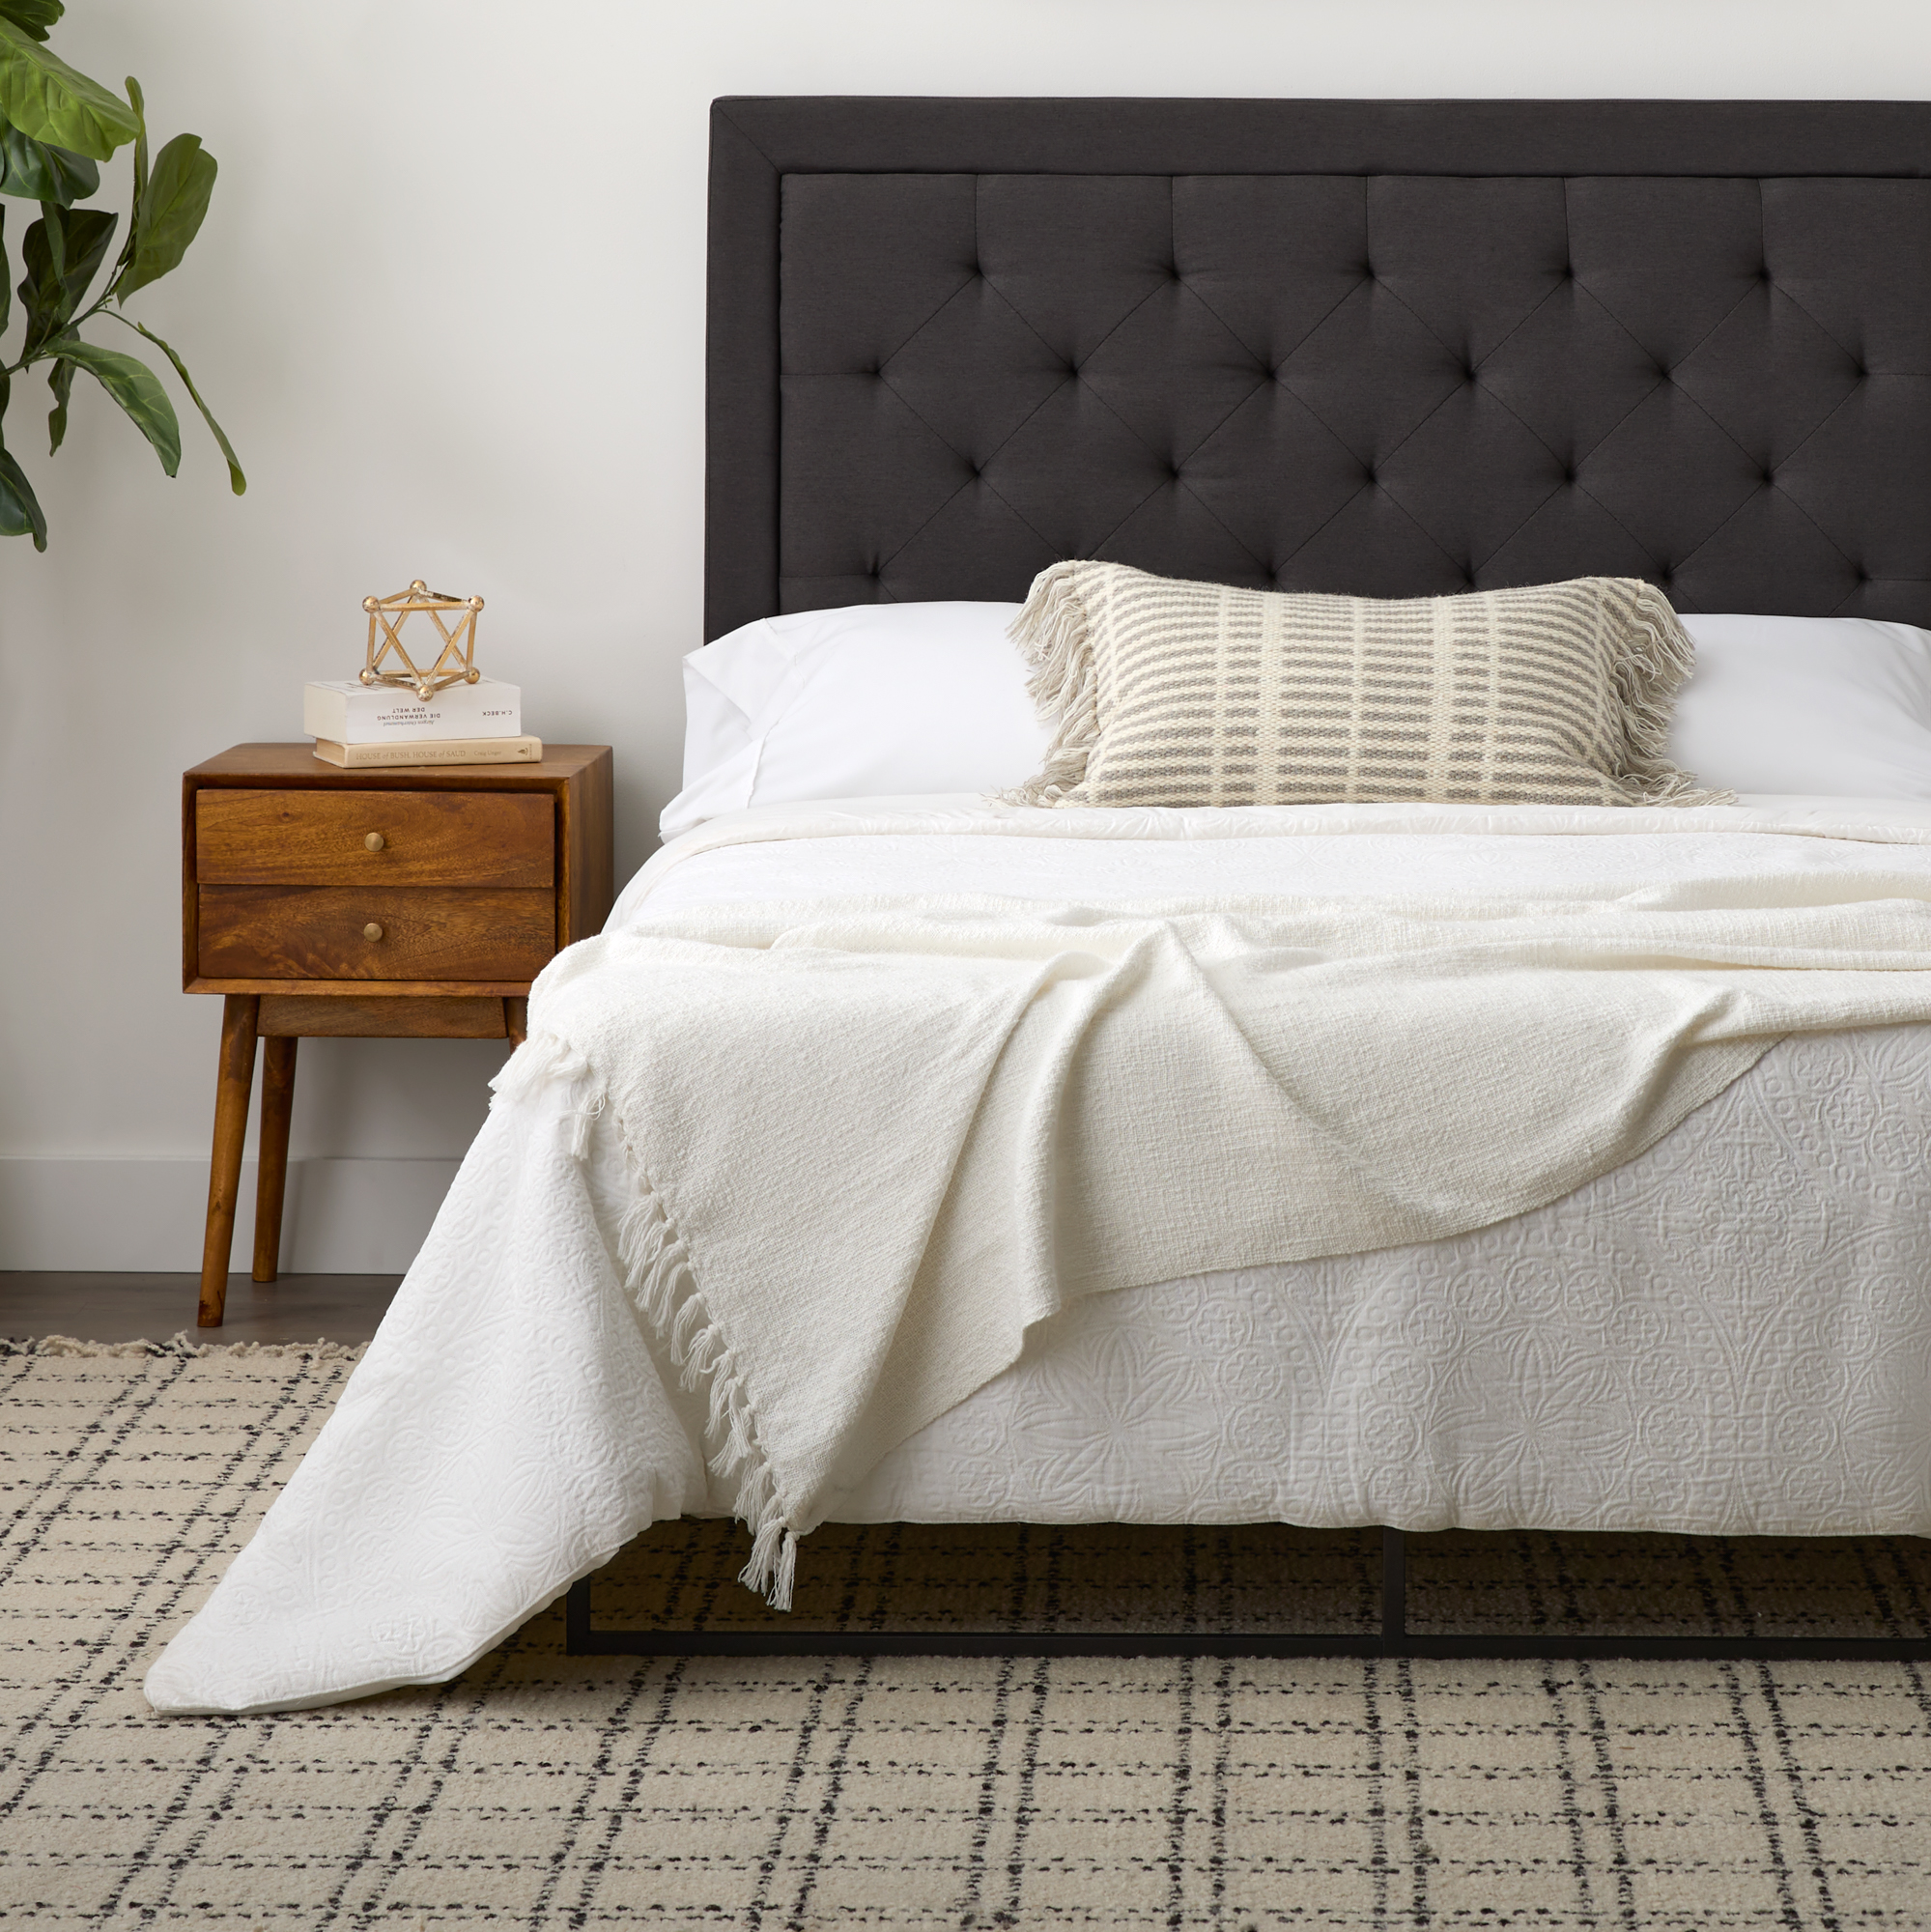 Rest Haven Medford Rectangle Upholstered Headboard with Diamond Tufting, Queen, Charcoal - image 5 of 11